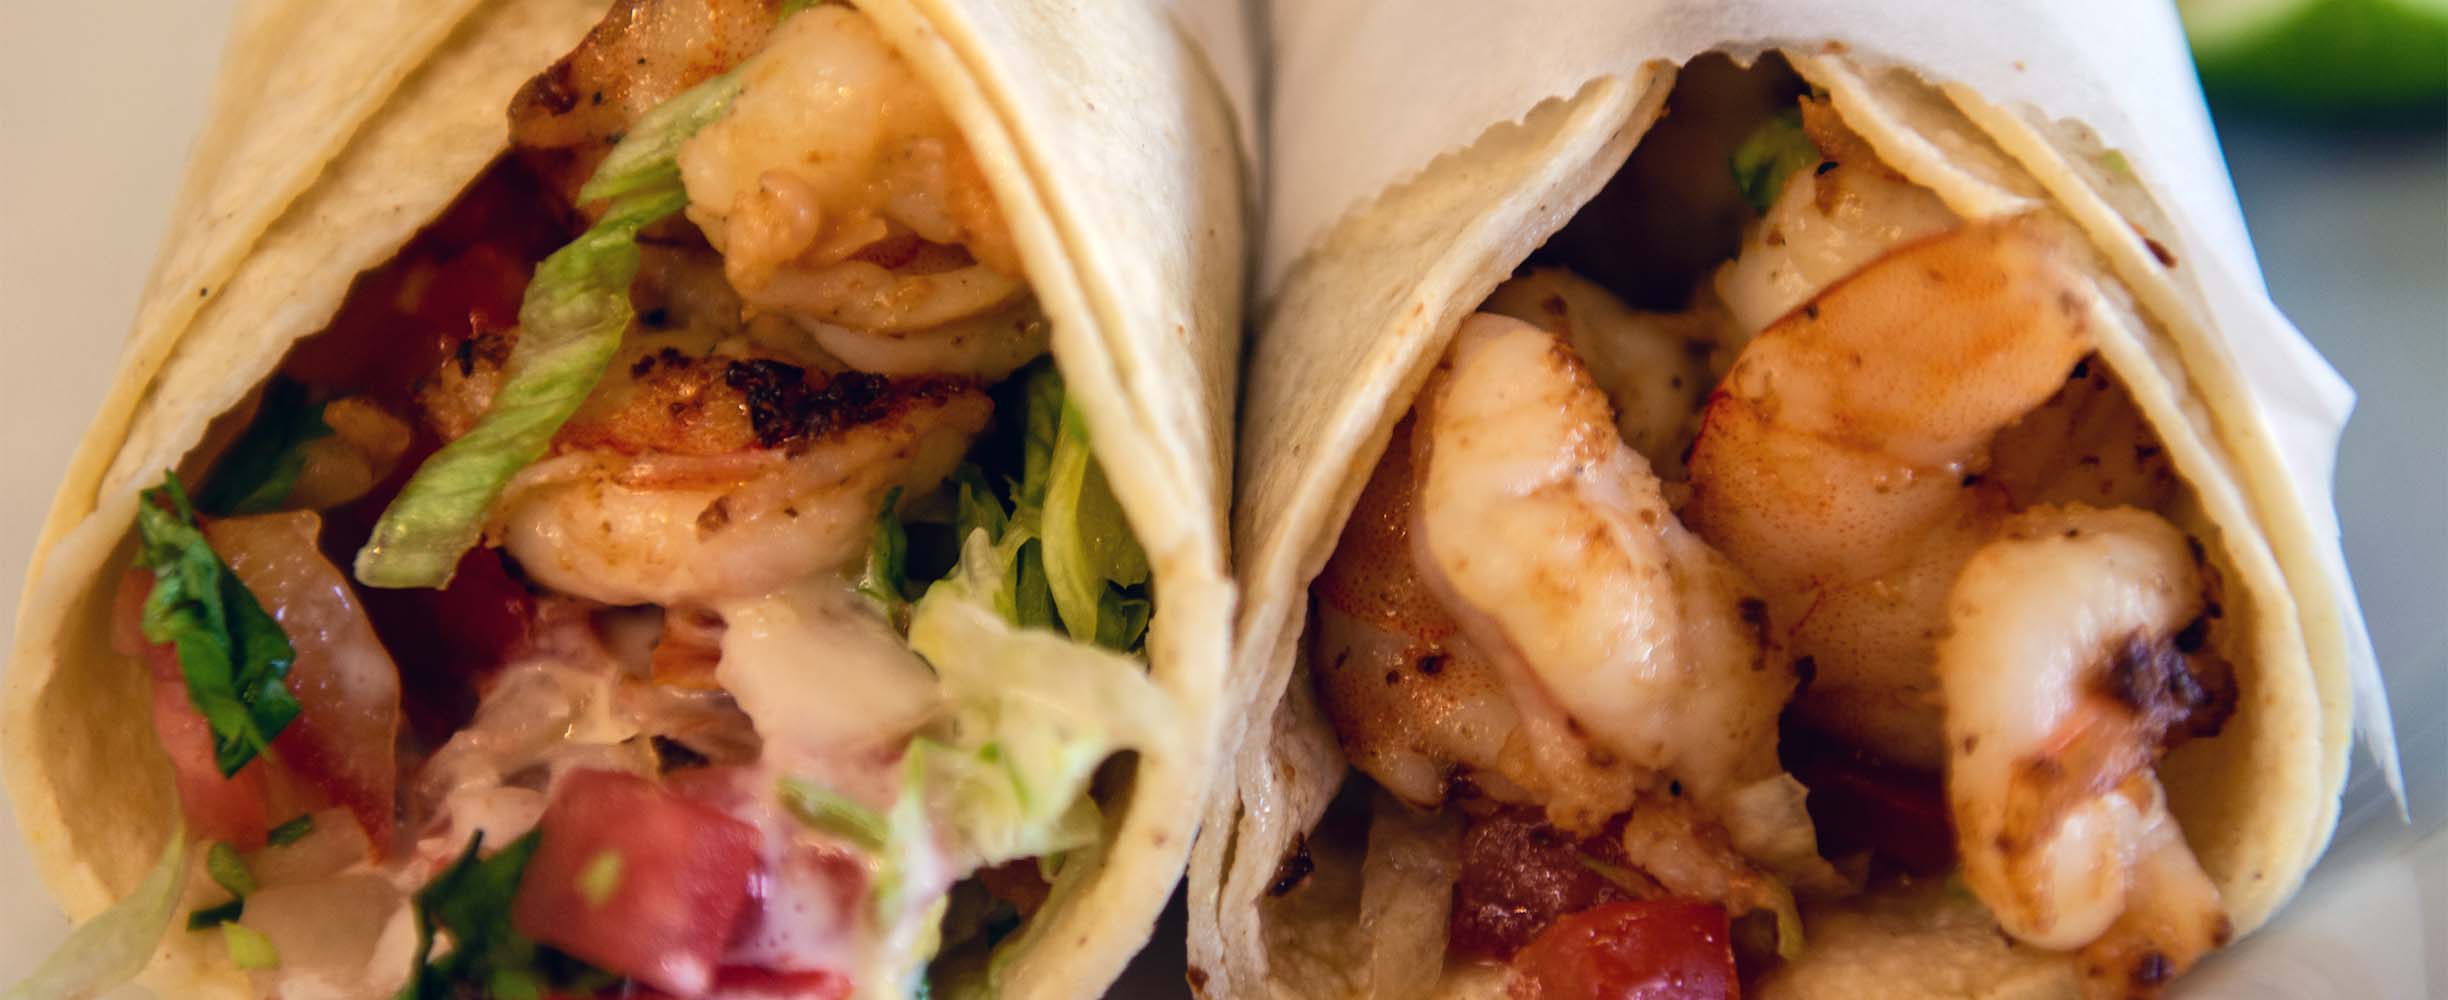 Shrimp Tacos are one of the most tipical dishes that gives our name Taquería.